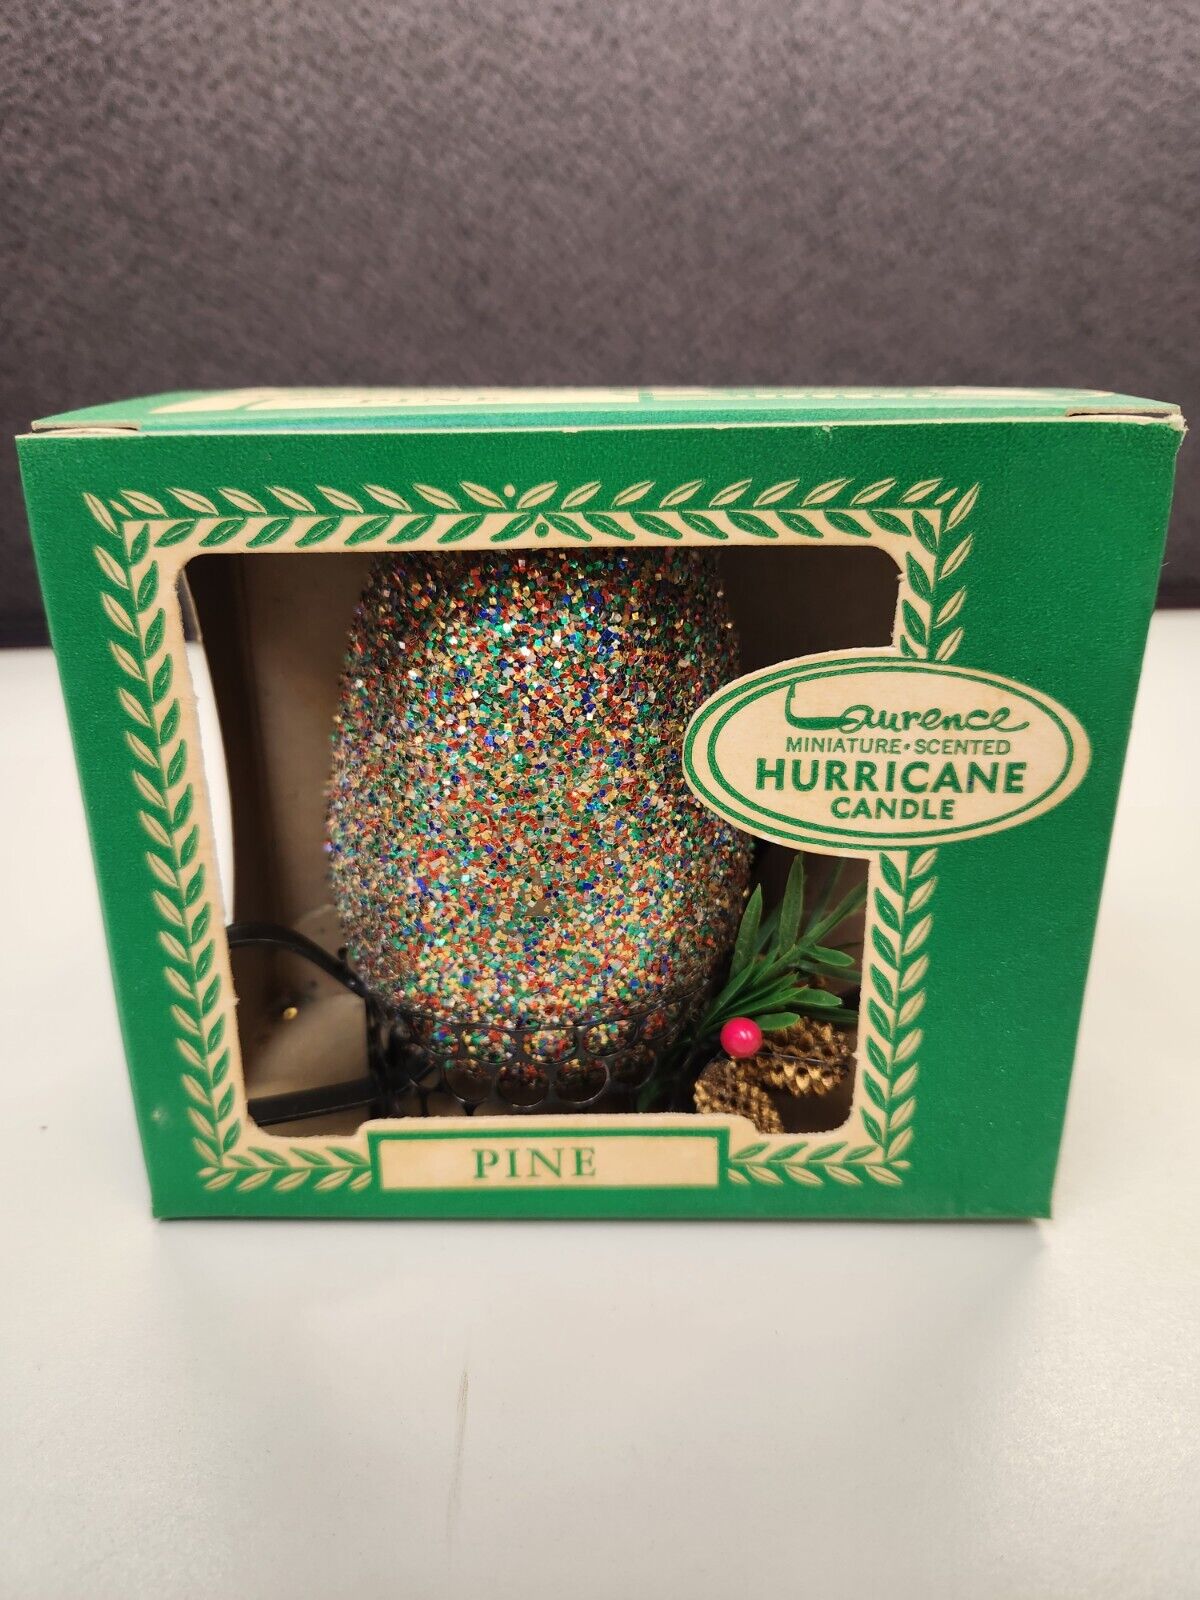 Vintage Laurence Miniature Multicolor Pine Hurricane Candle Boxed Glitter W/Box